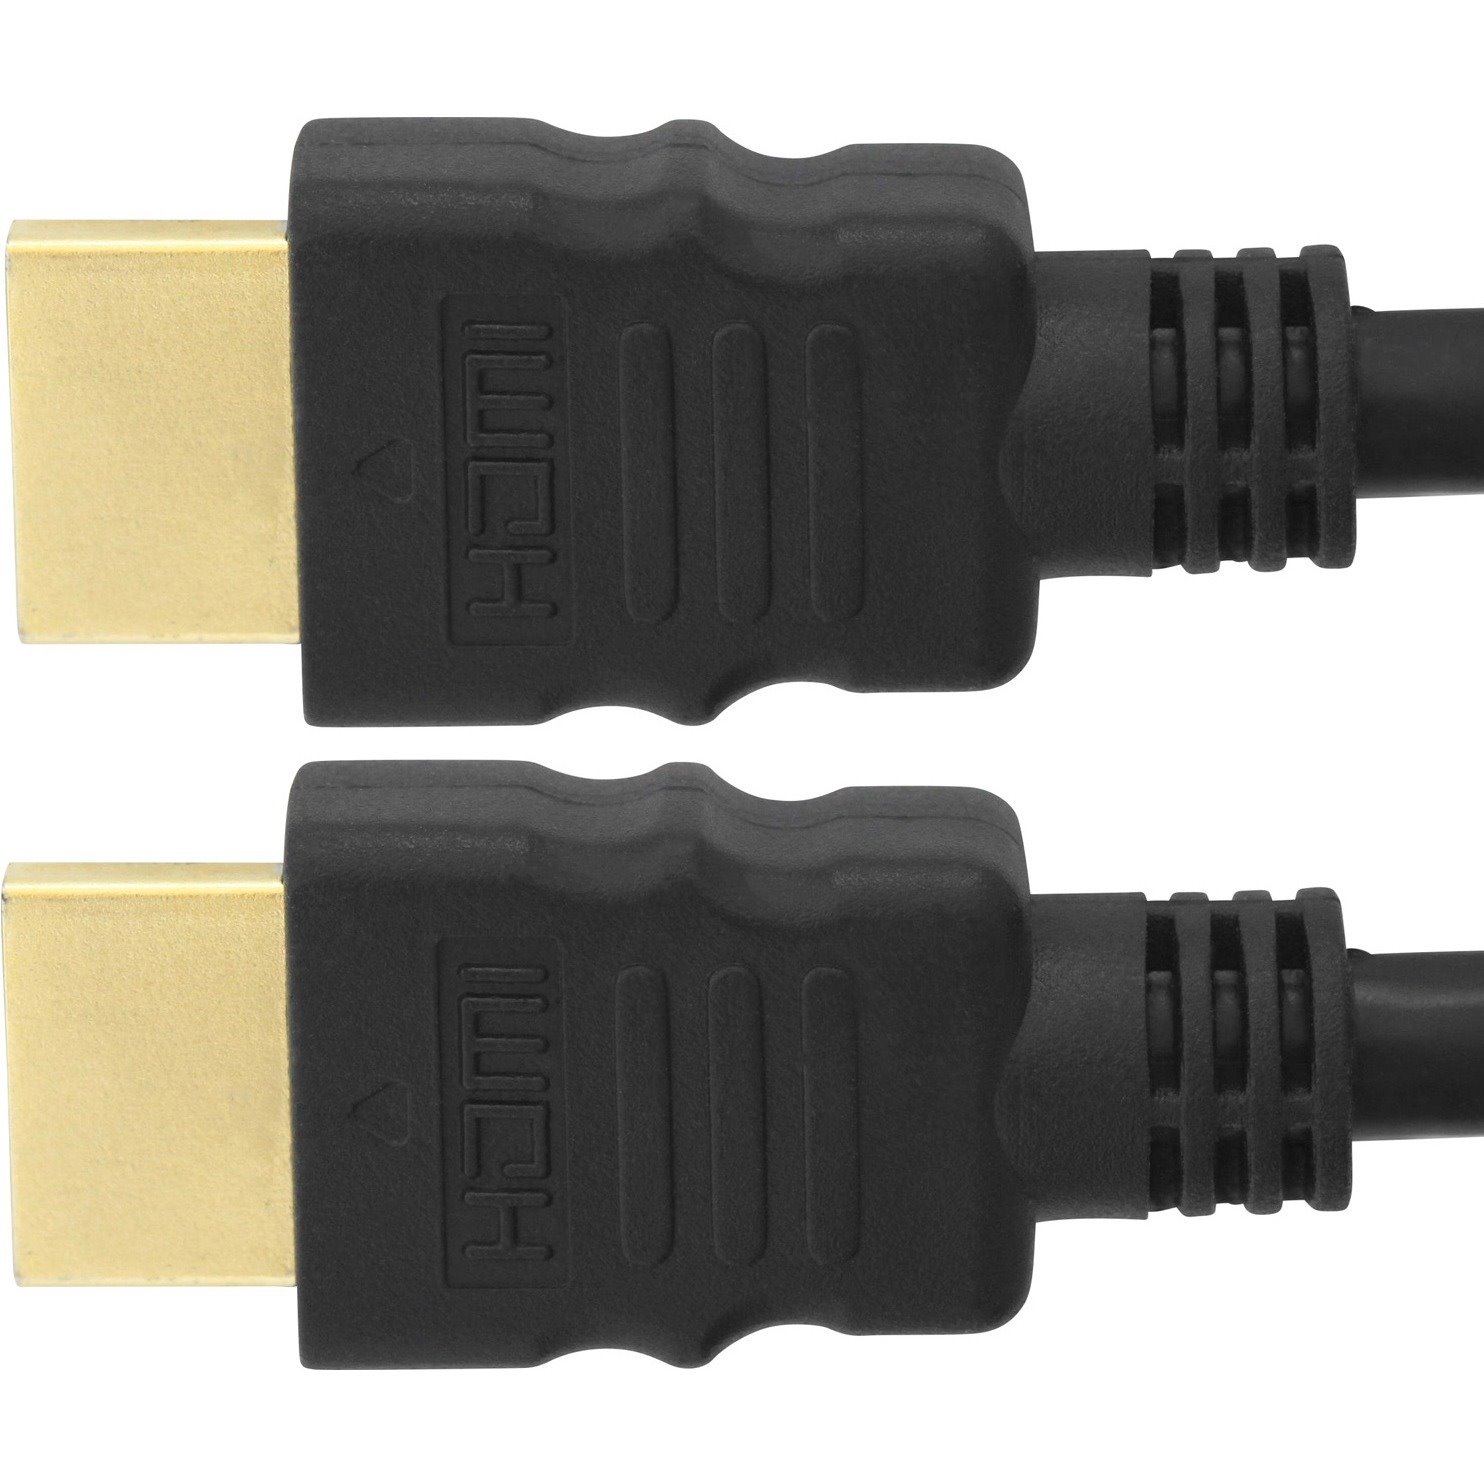 4XEM 6FT 2M High Speed HDMI cable fully supporting 1080p 3D, Ethernet and Audio return channel